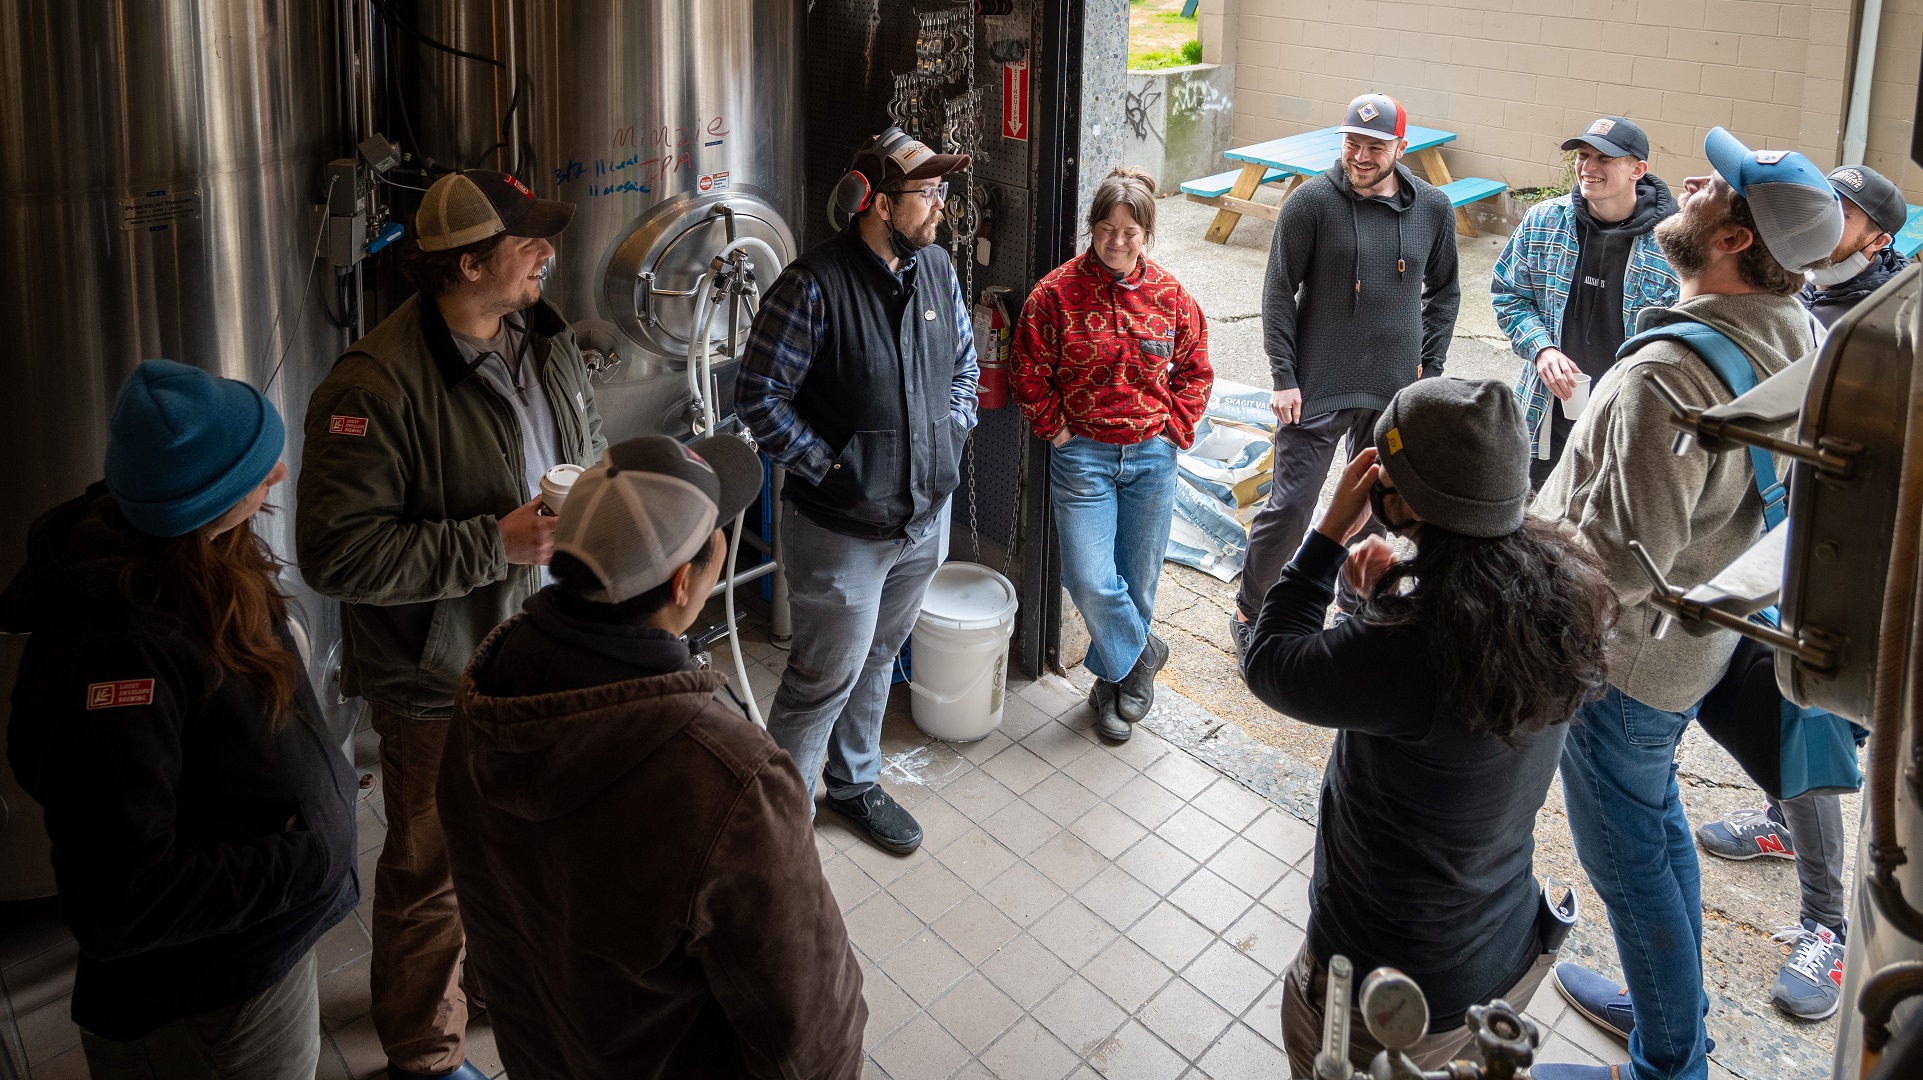 The Brew Day crew gathered around as Aaron regales them with tales of beer